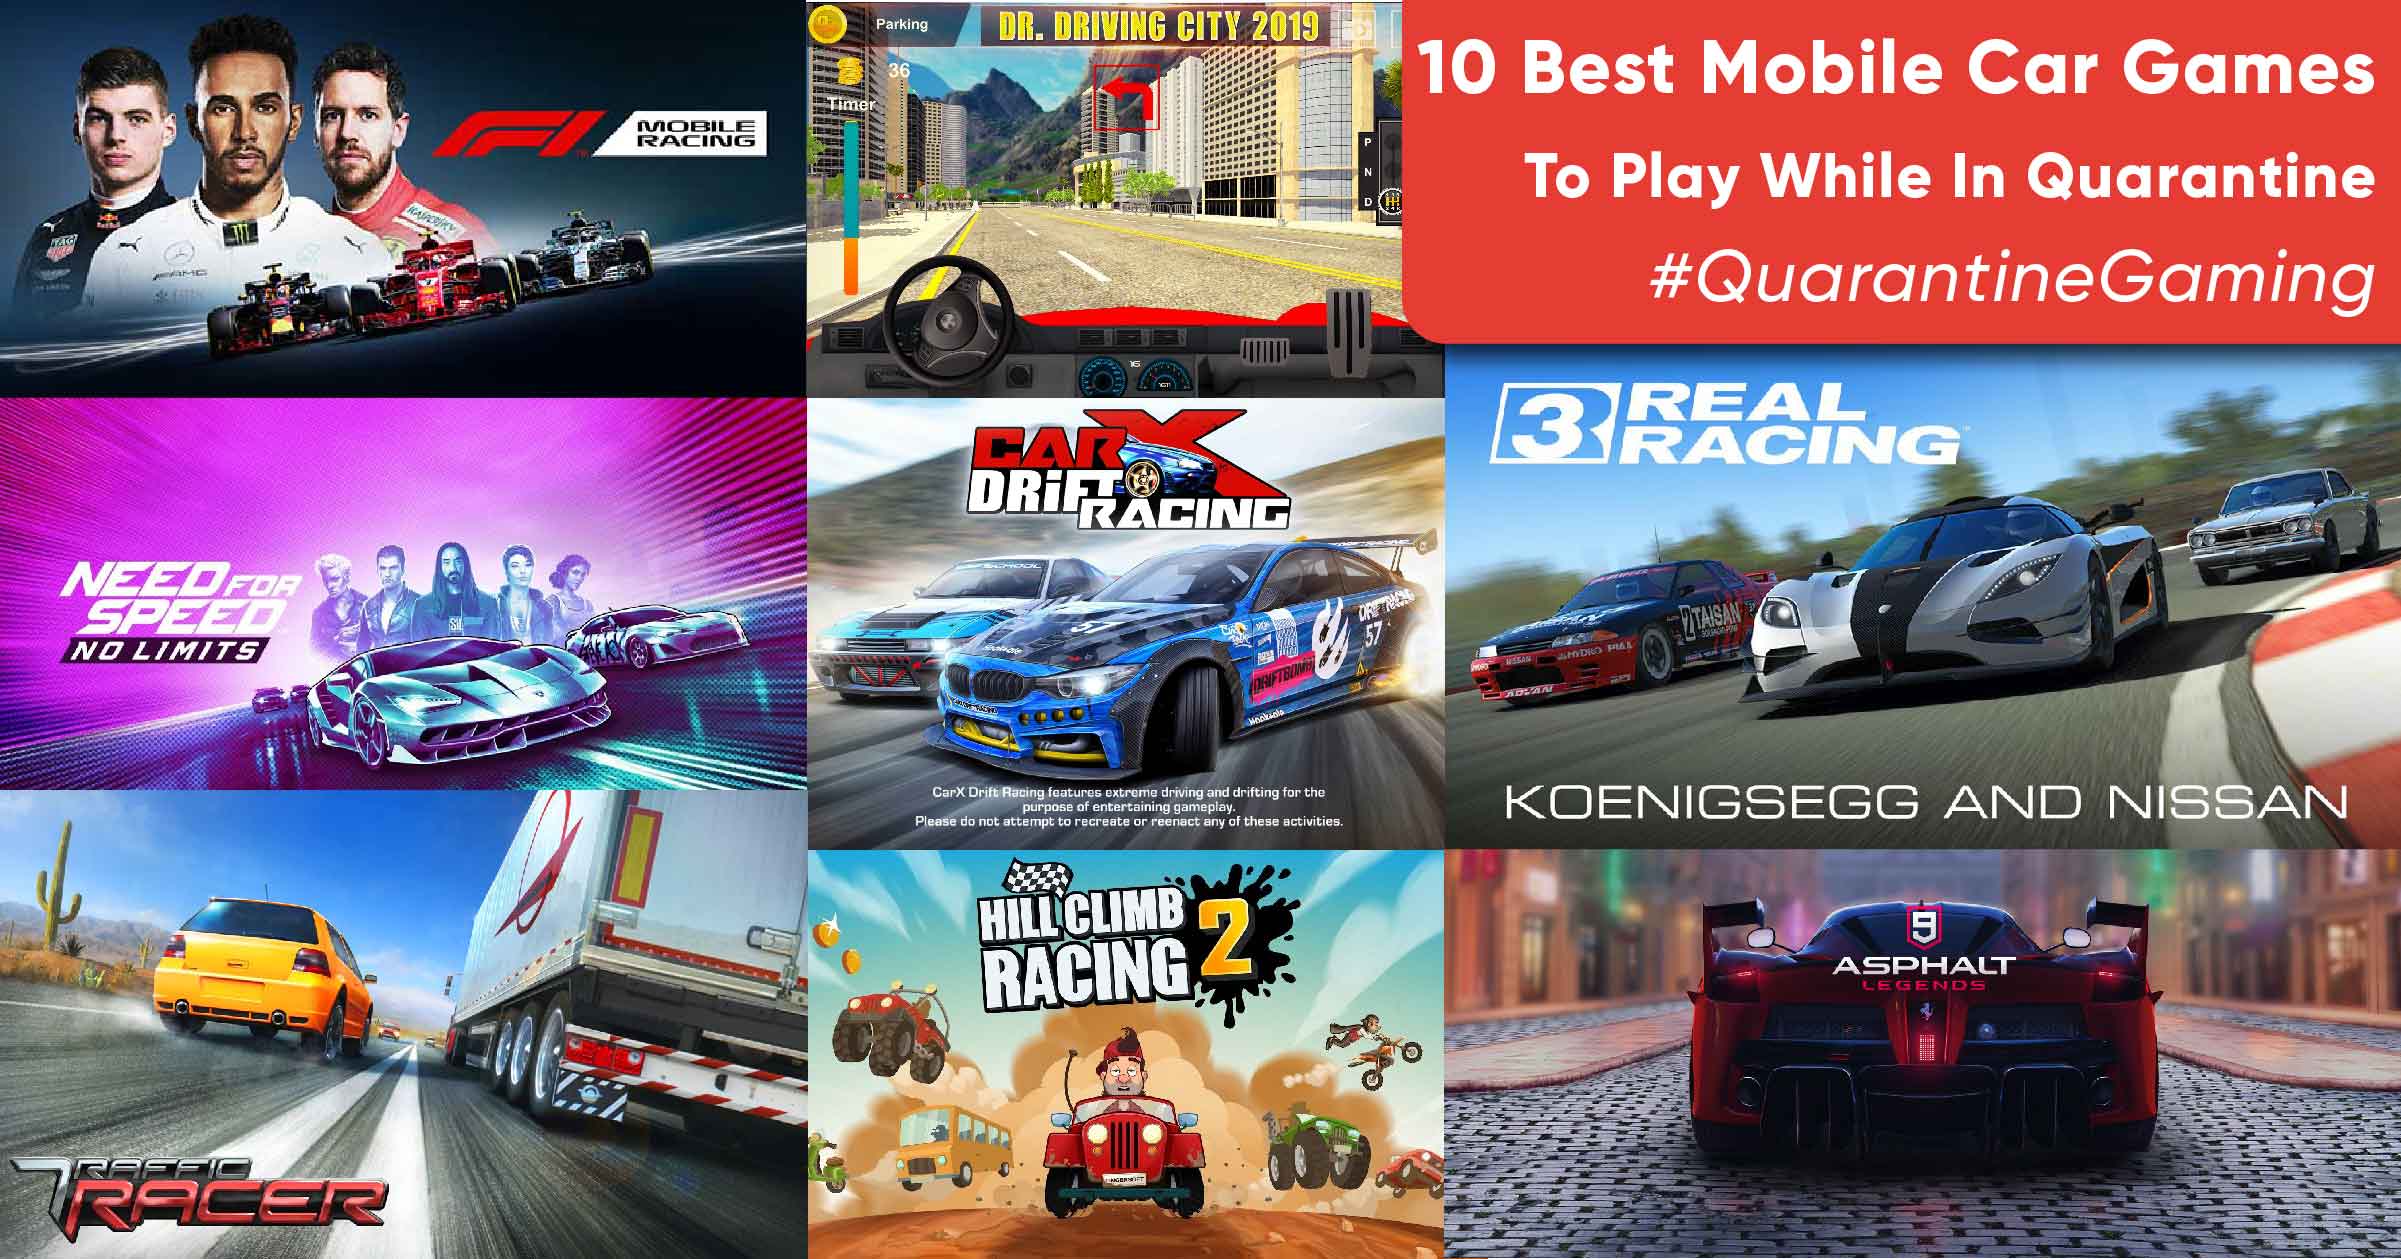 Best Car Racing Games to Play Online on Android Mobile: Hill Climb